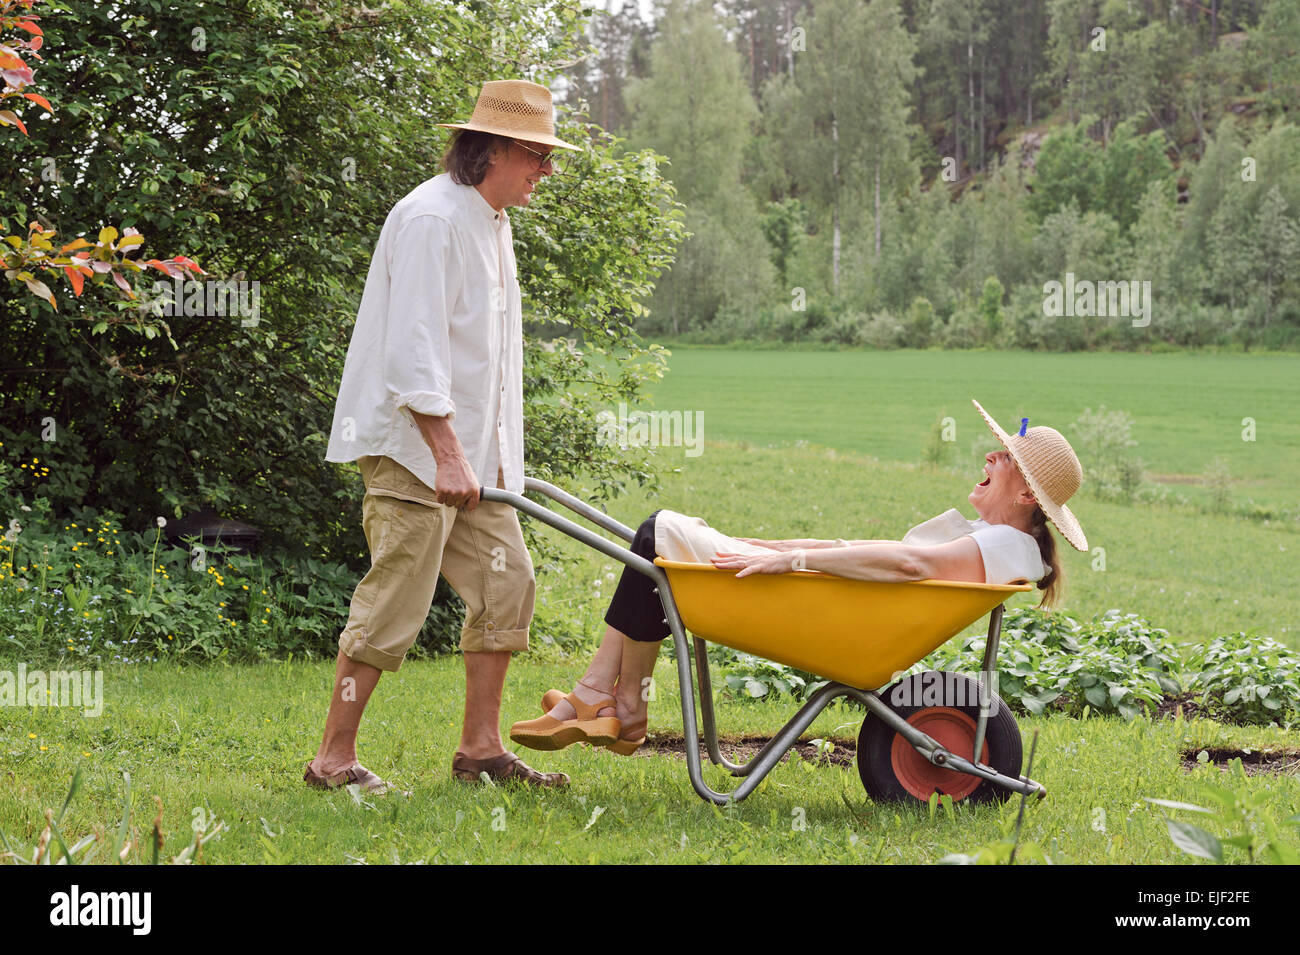 Senior man carries a senior woman in a wheelbarrow outdoors near a vegetable patch. They're laughing and having fun. Stock Photo